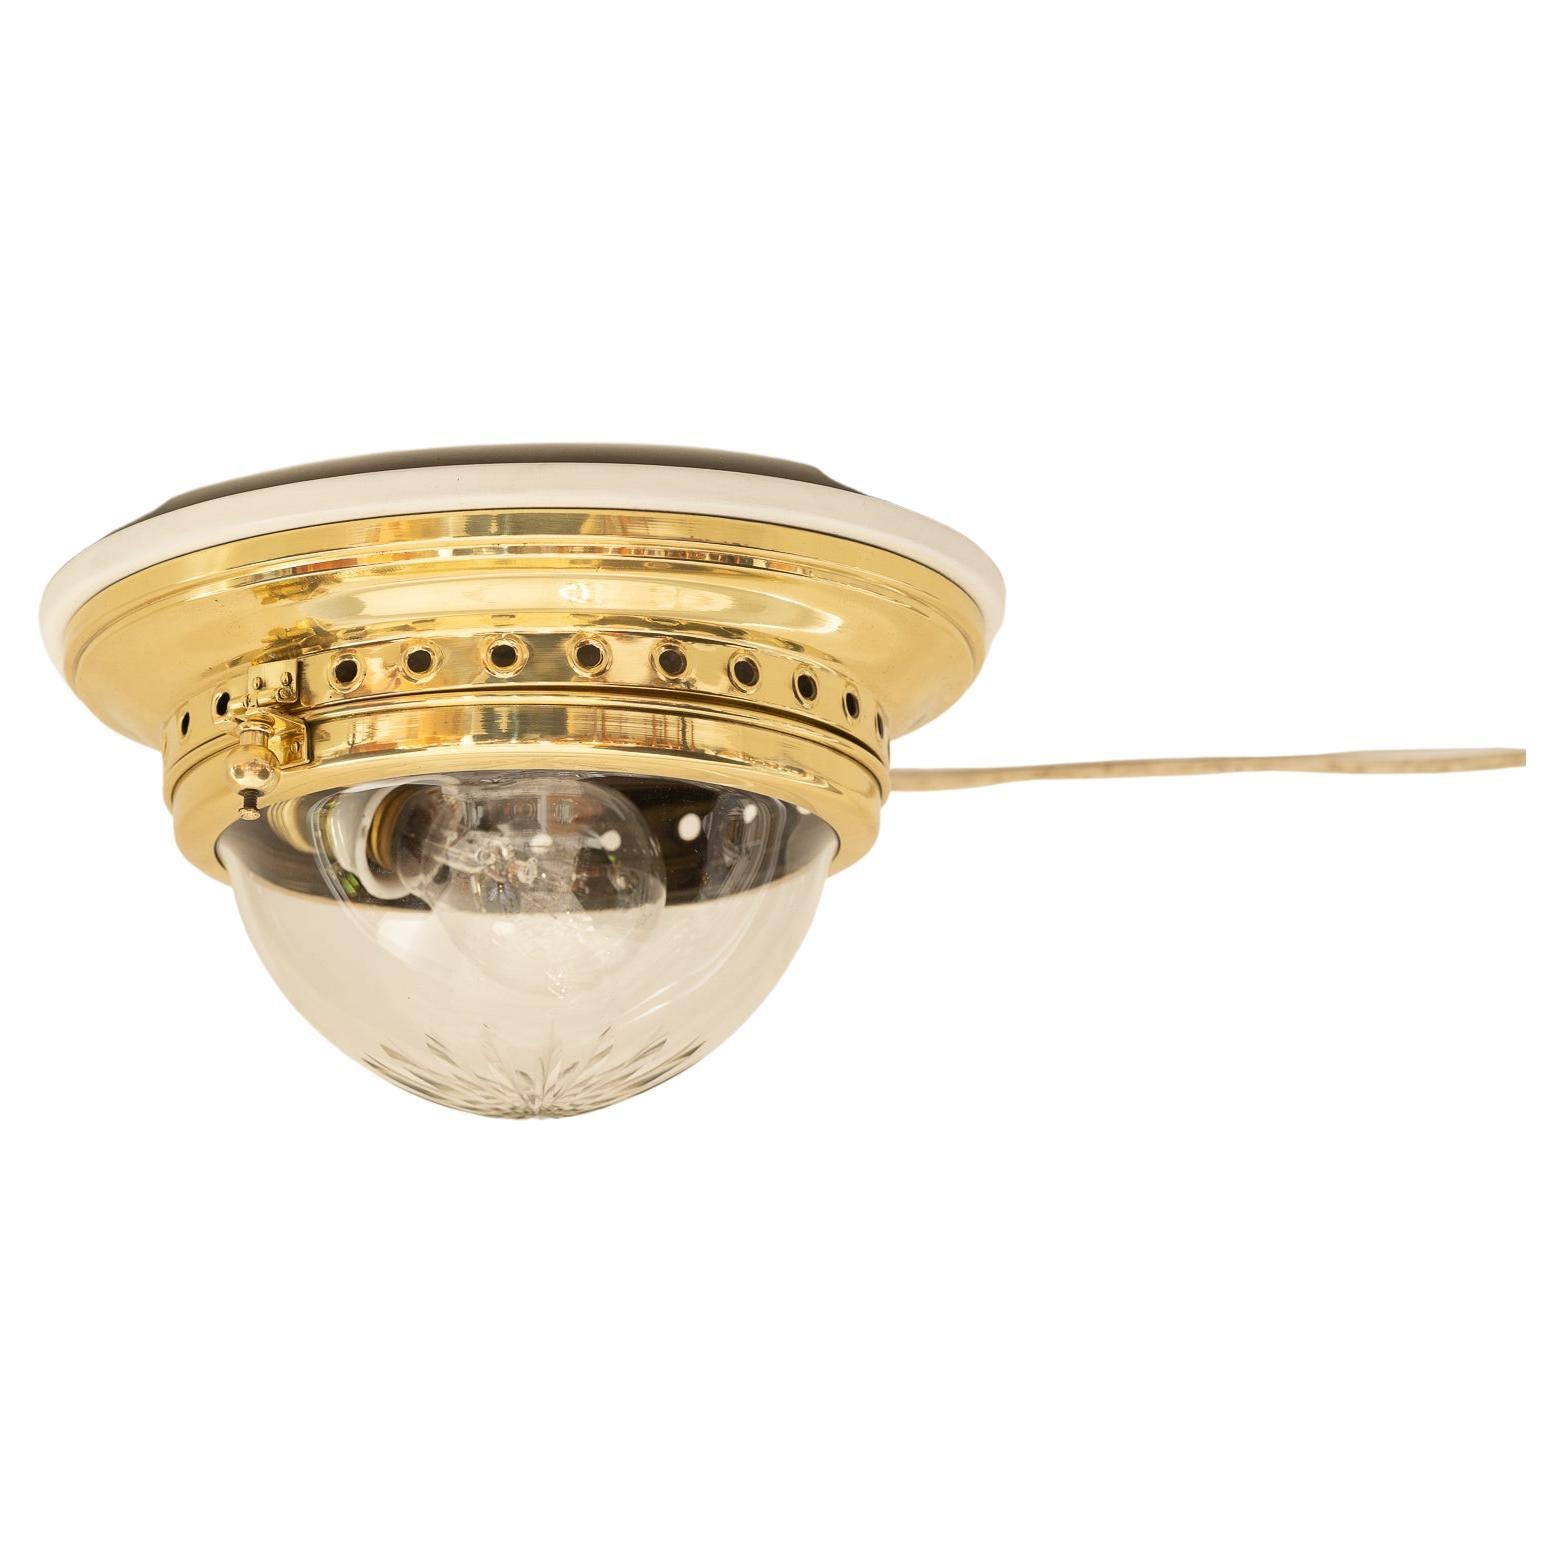 Small Art Deco Ceiling Lamp with Original Cut Glass Shade, Around 1920s